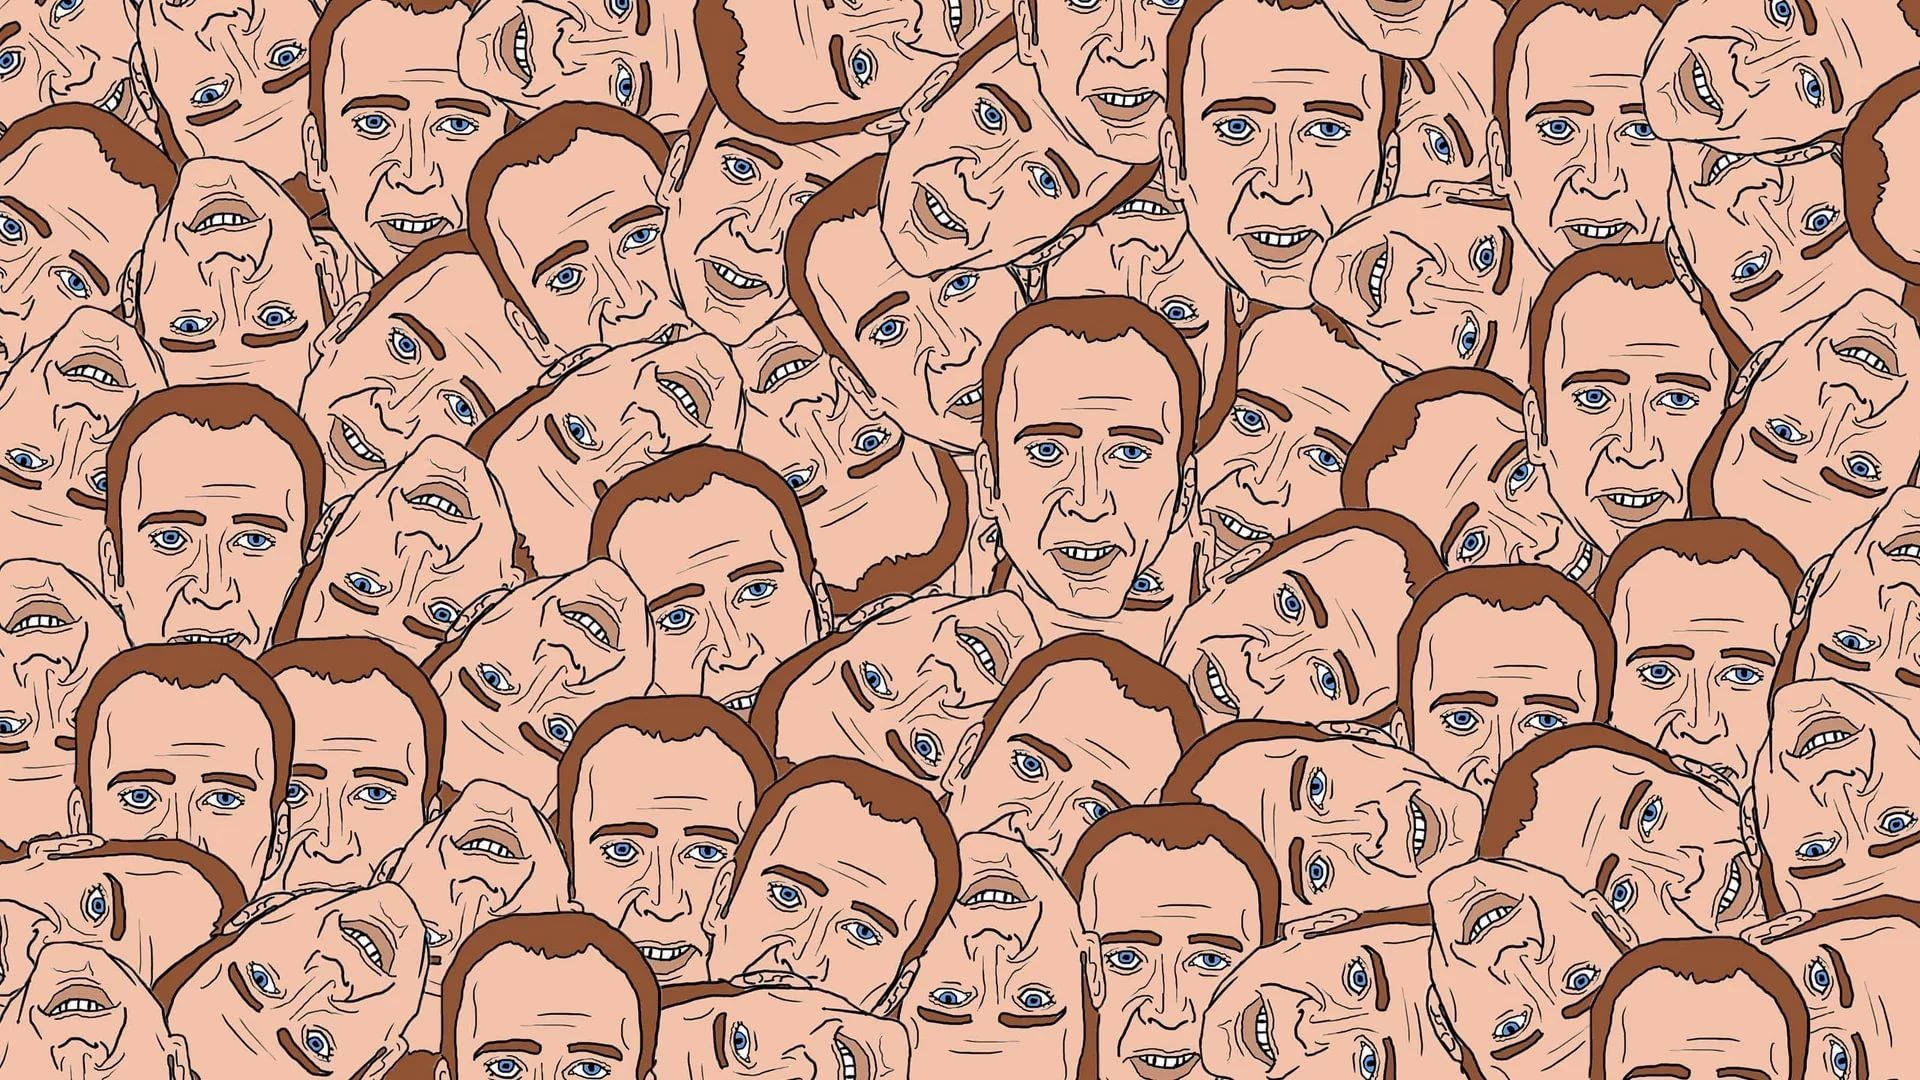 Nicholas Cage cartoon faces filling up a whole background, funny expression meme.